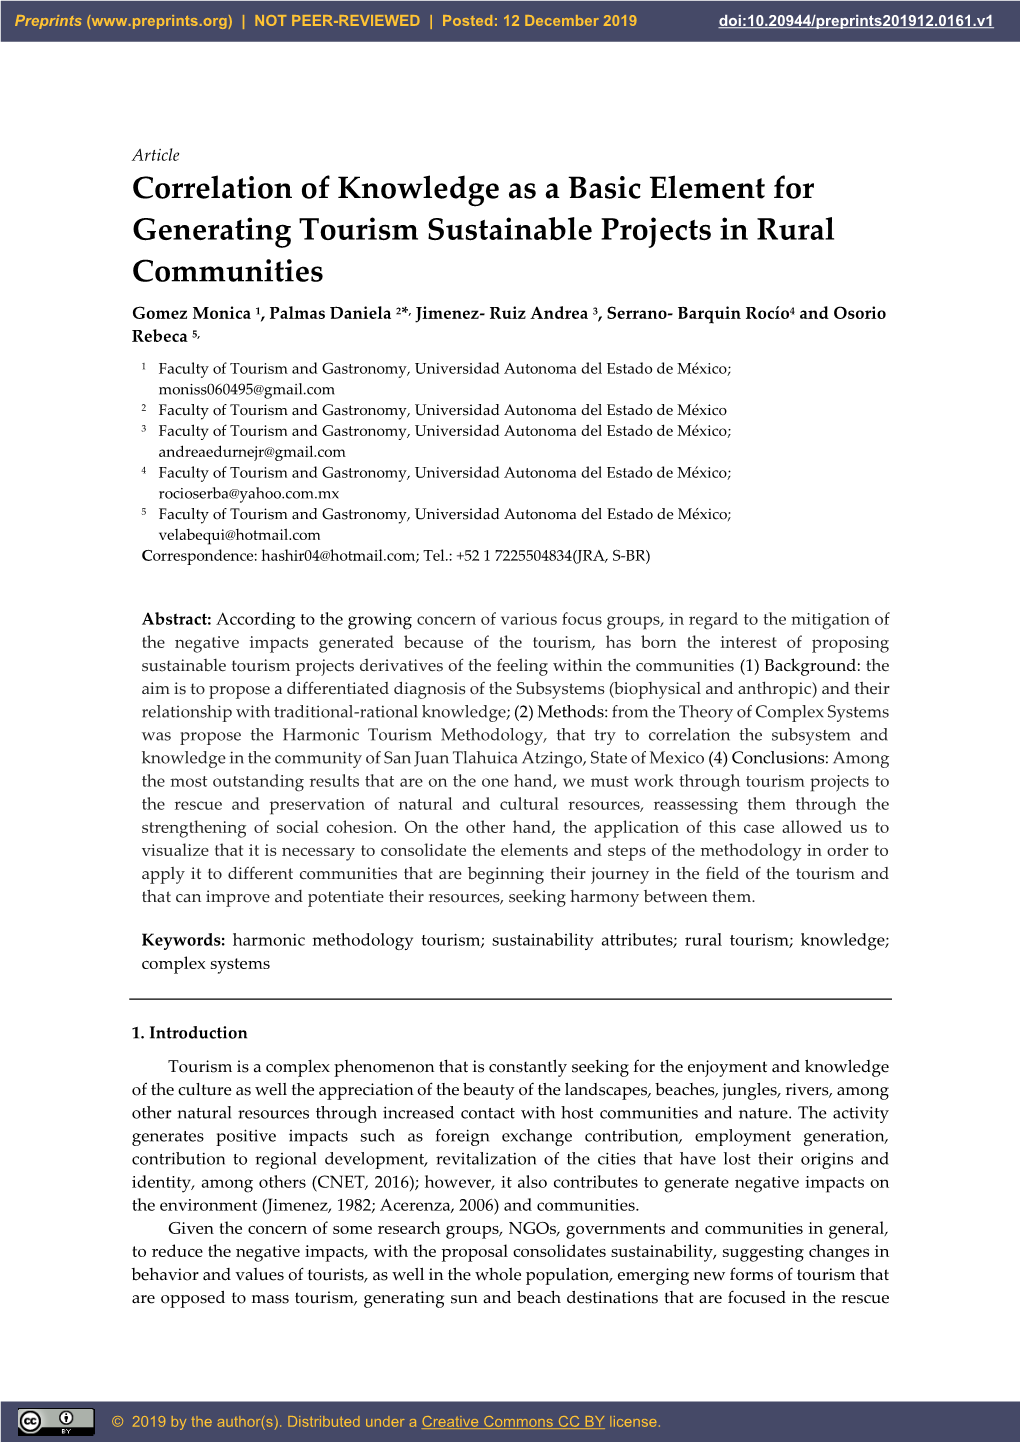 Correlation of Knowledge As a Basic Element for Generating Tourism Sustainable Projects in Rural Communities